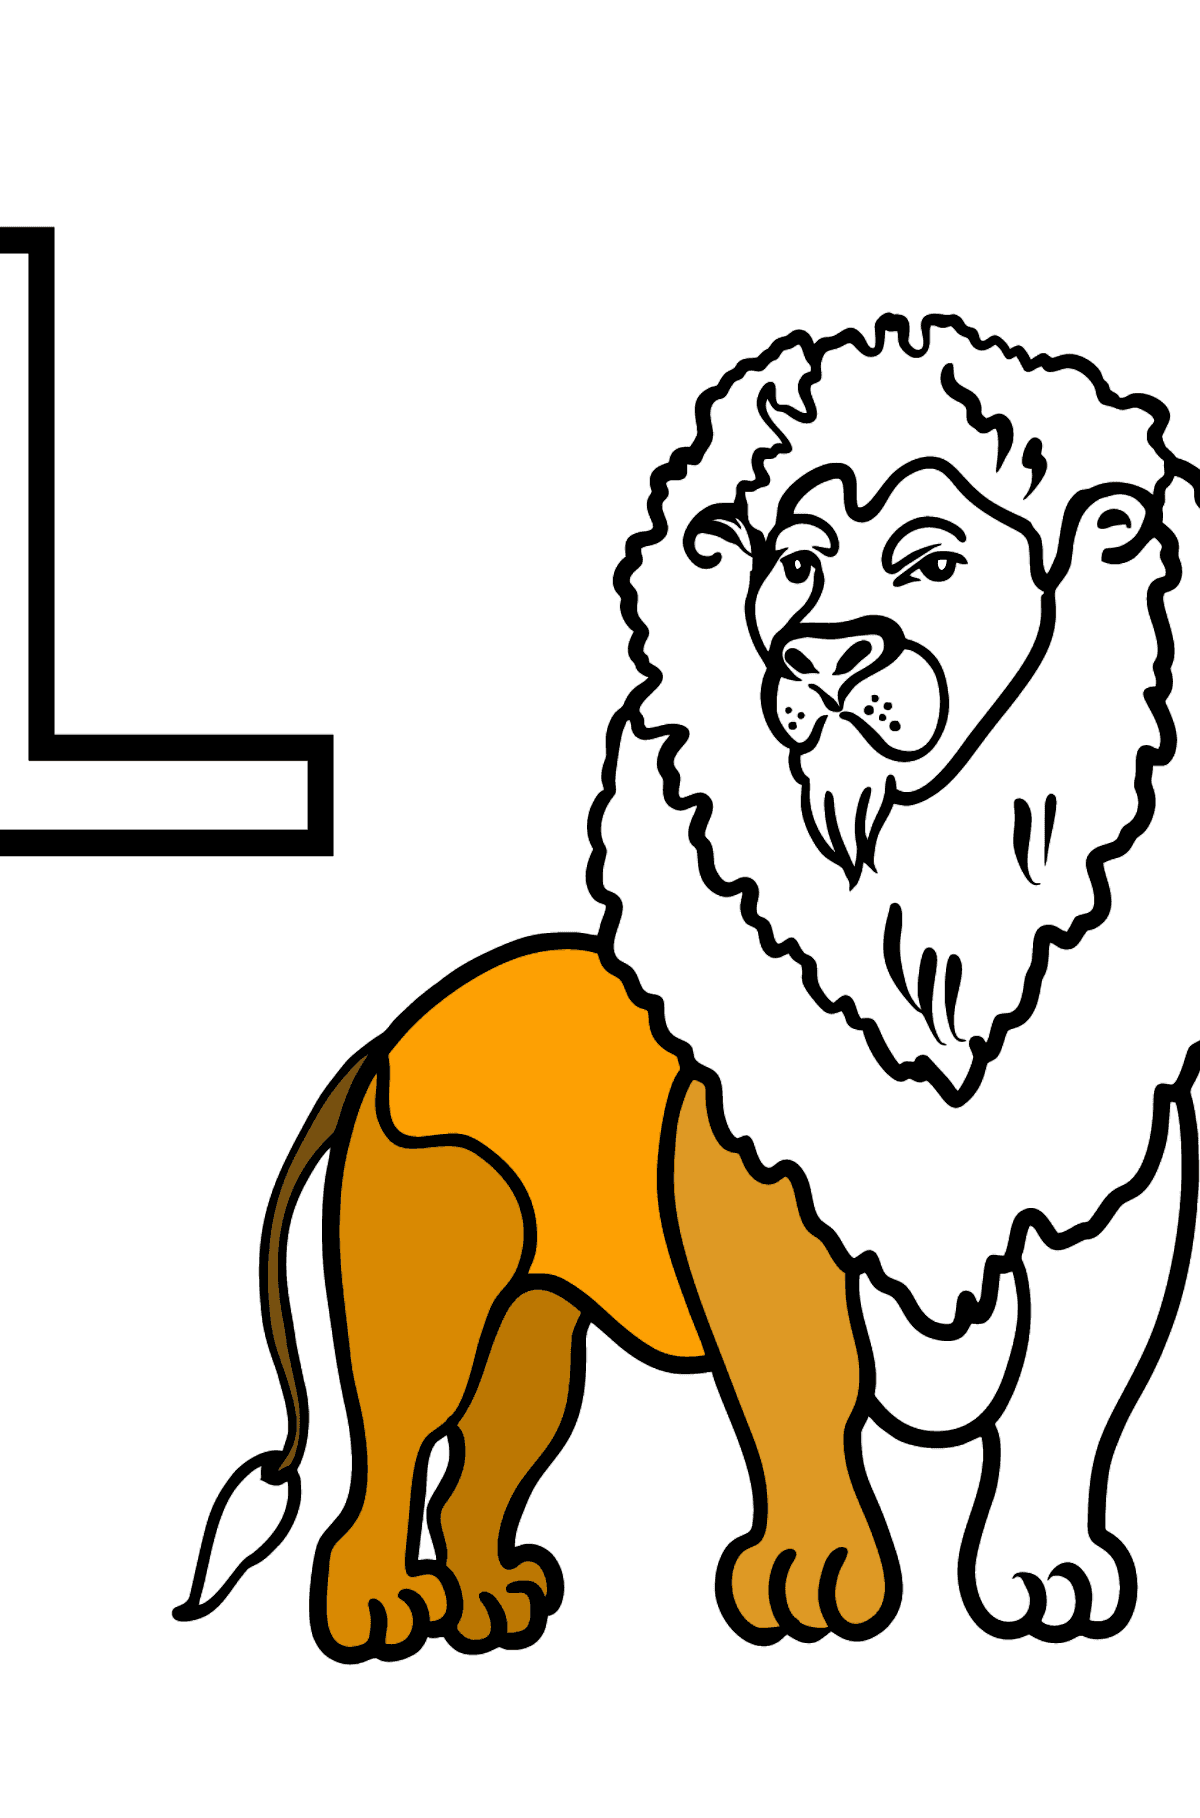 English Letter L coloring pages - LION - Coloring Pages for Kids